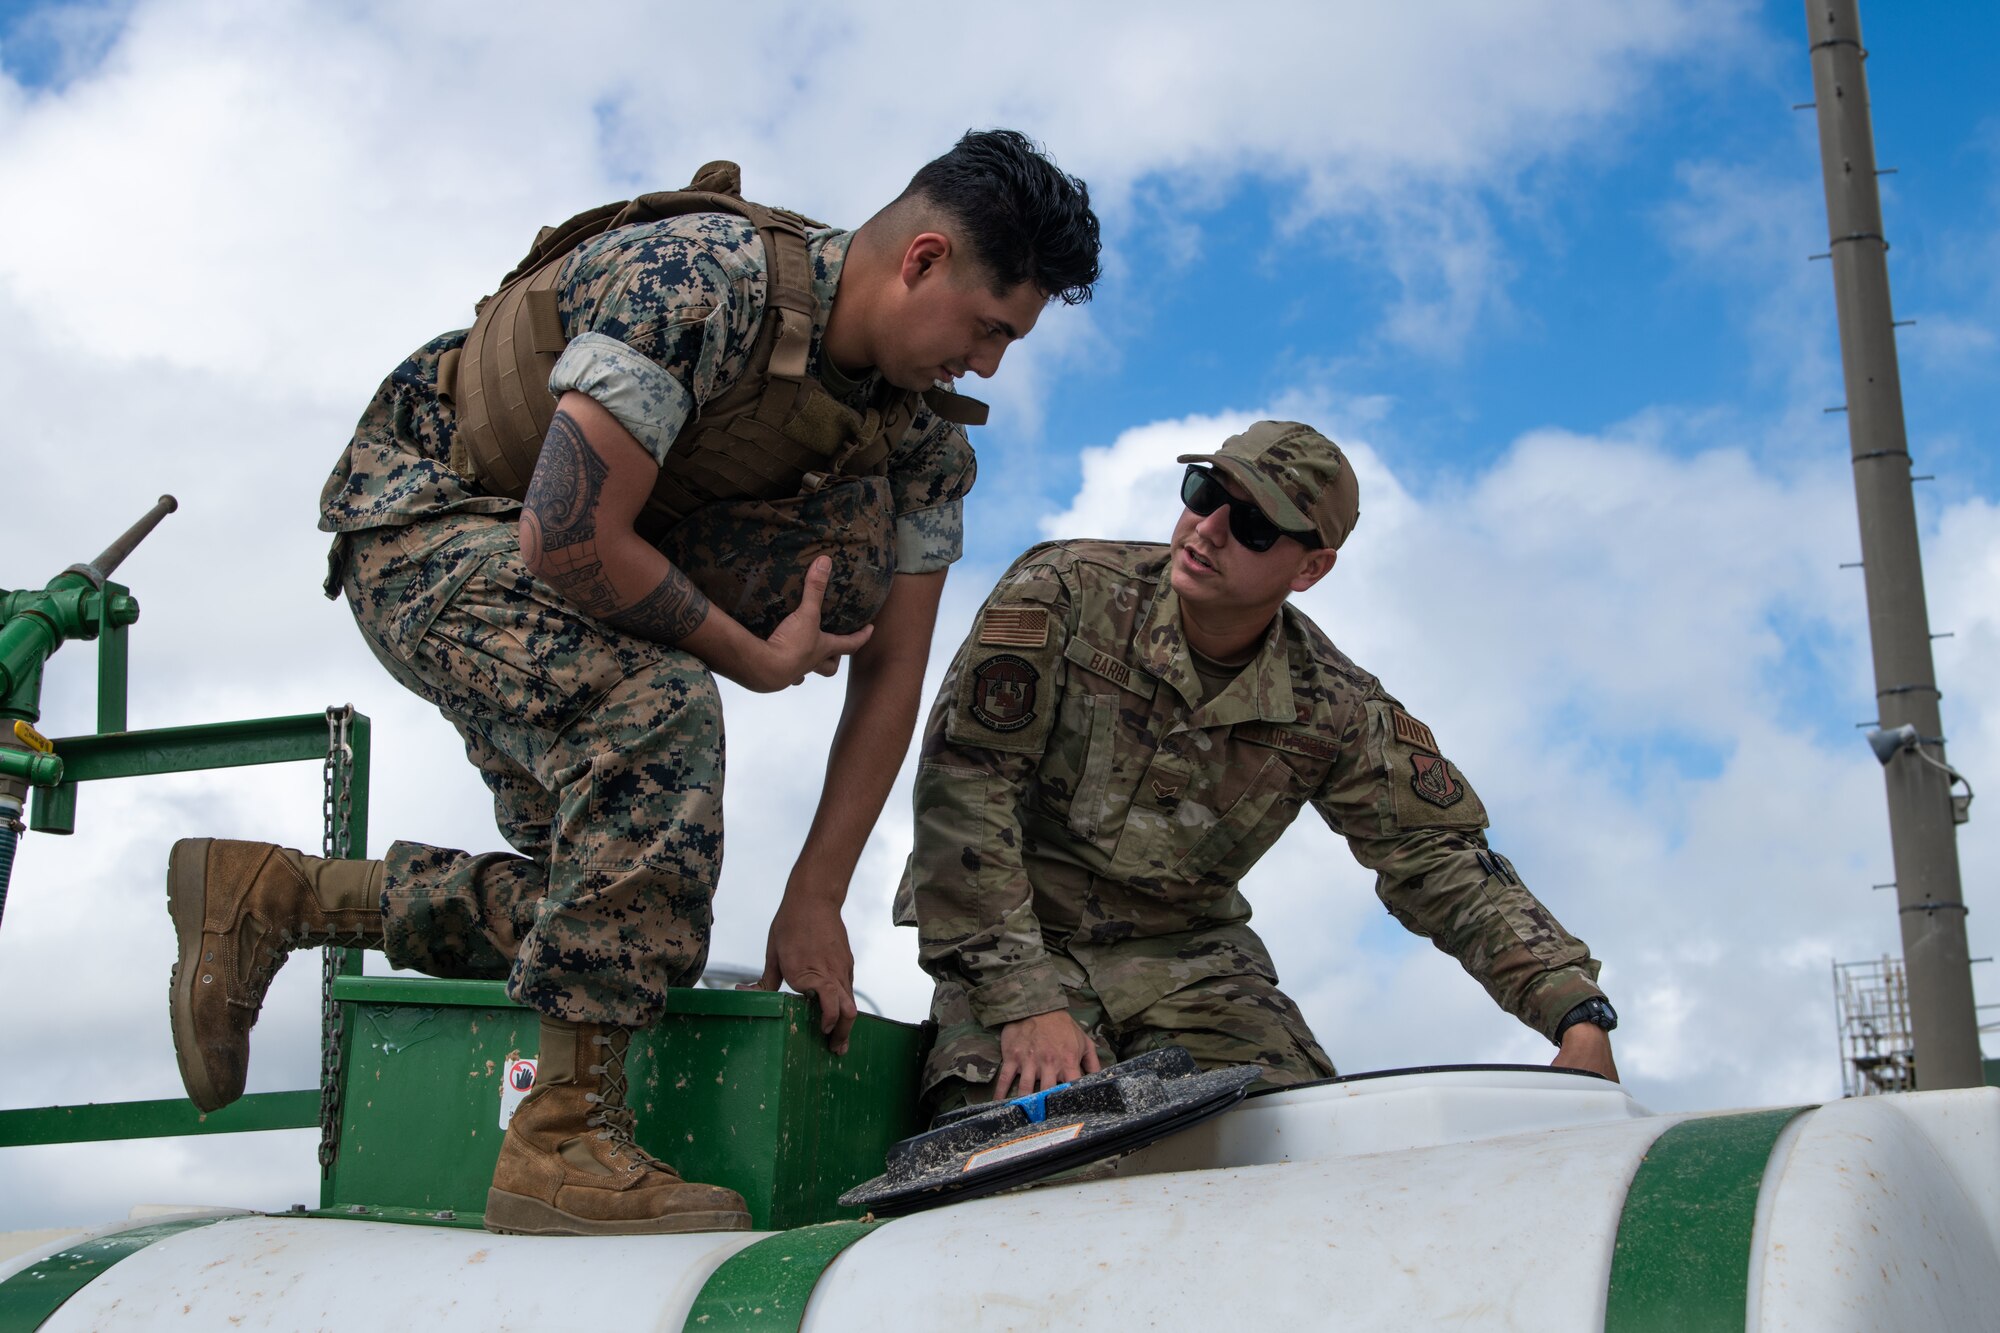 A Marine and Airman inspect equipment.